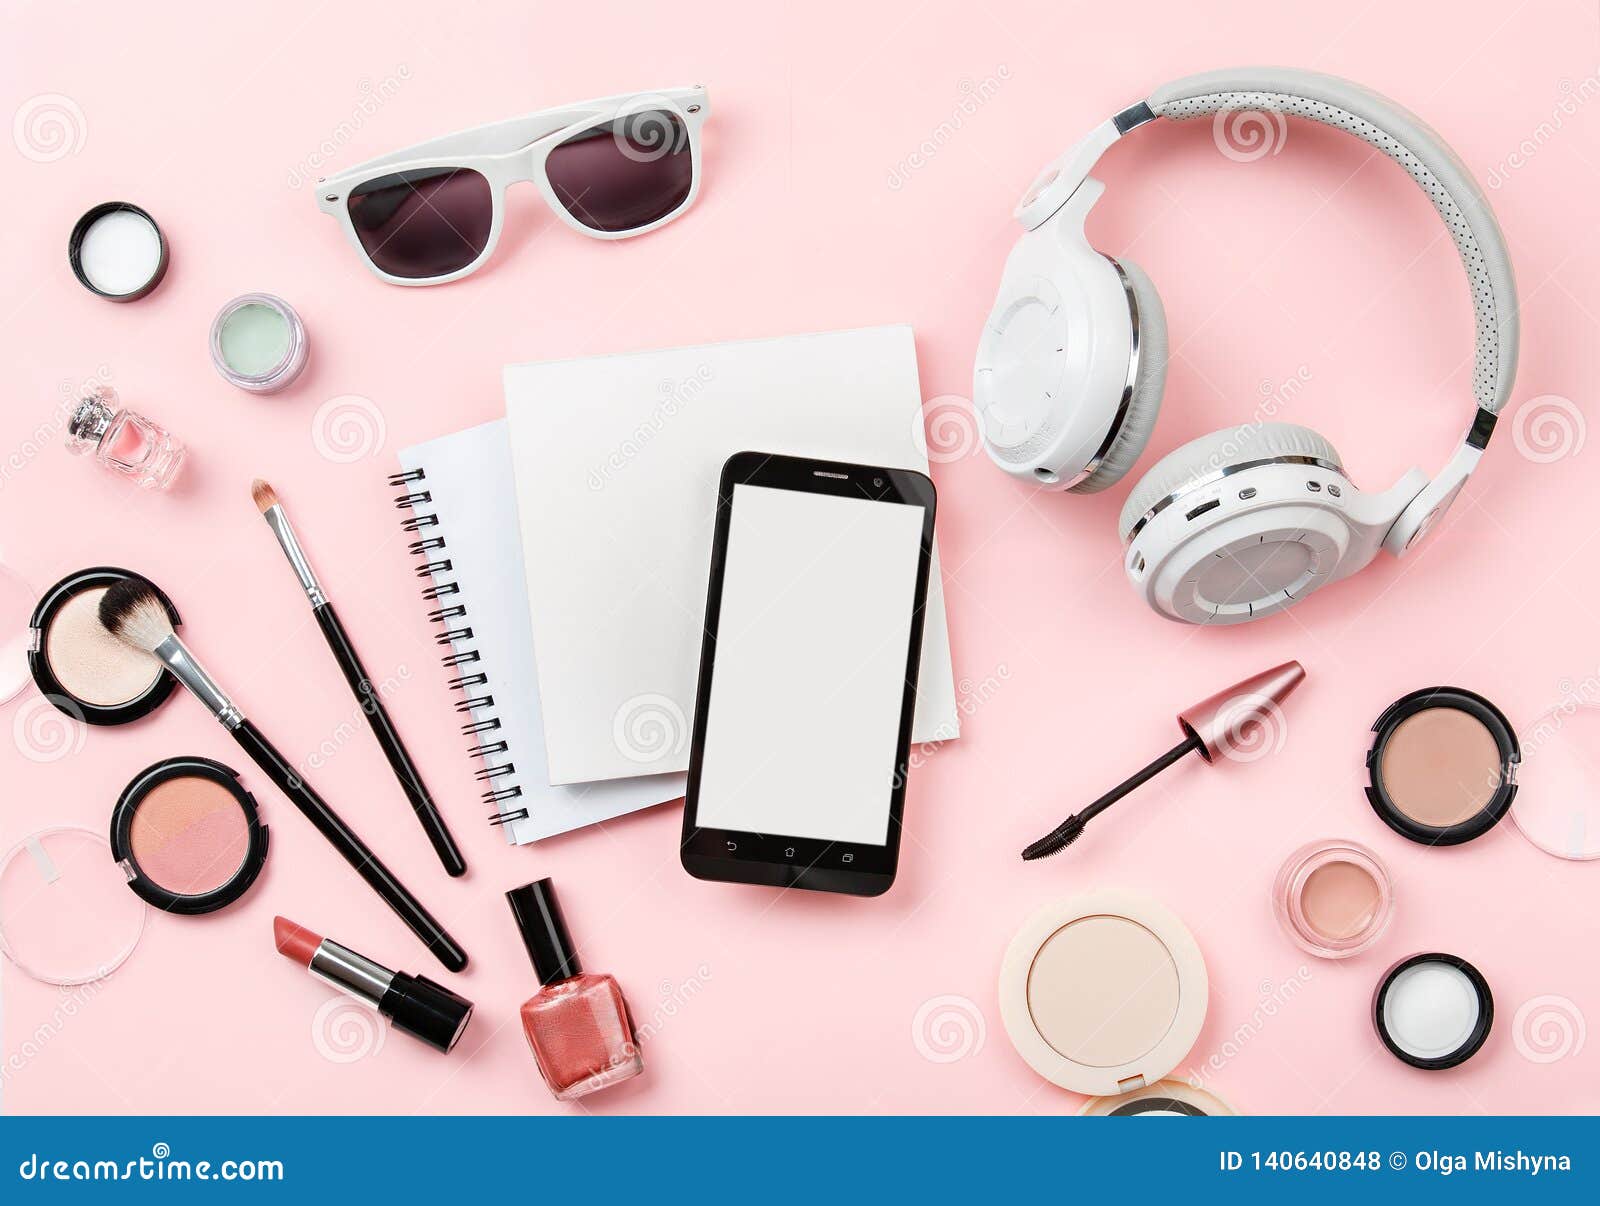 Download Mock Up Woman`s Cosmetics, Phone, Headphones And Glasses ...